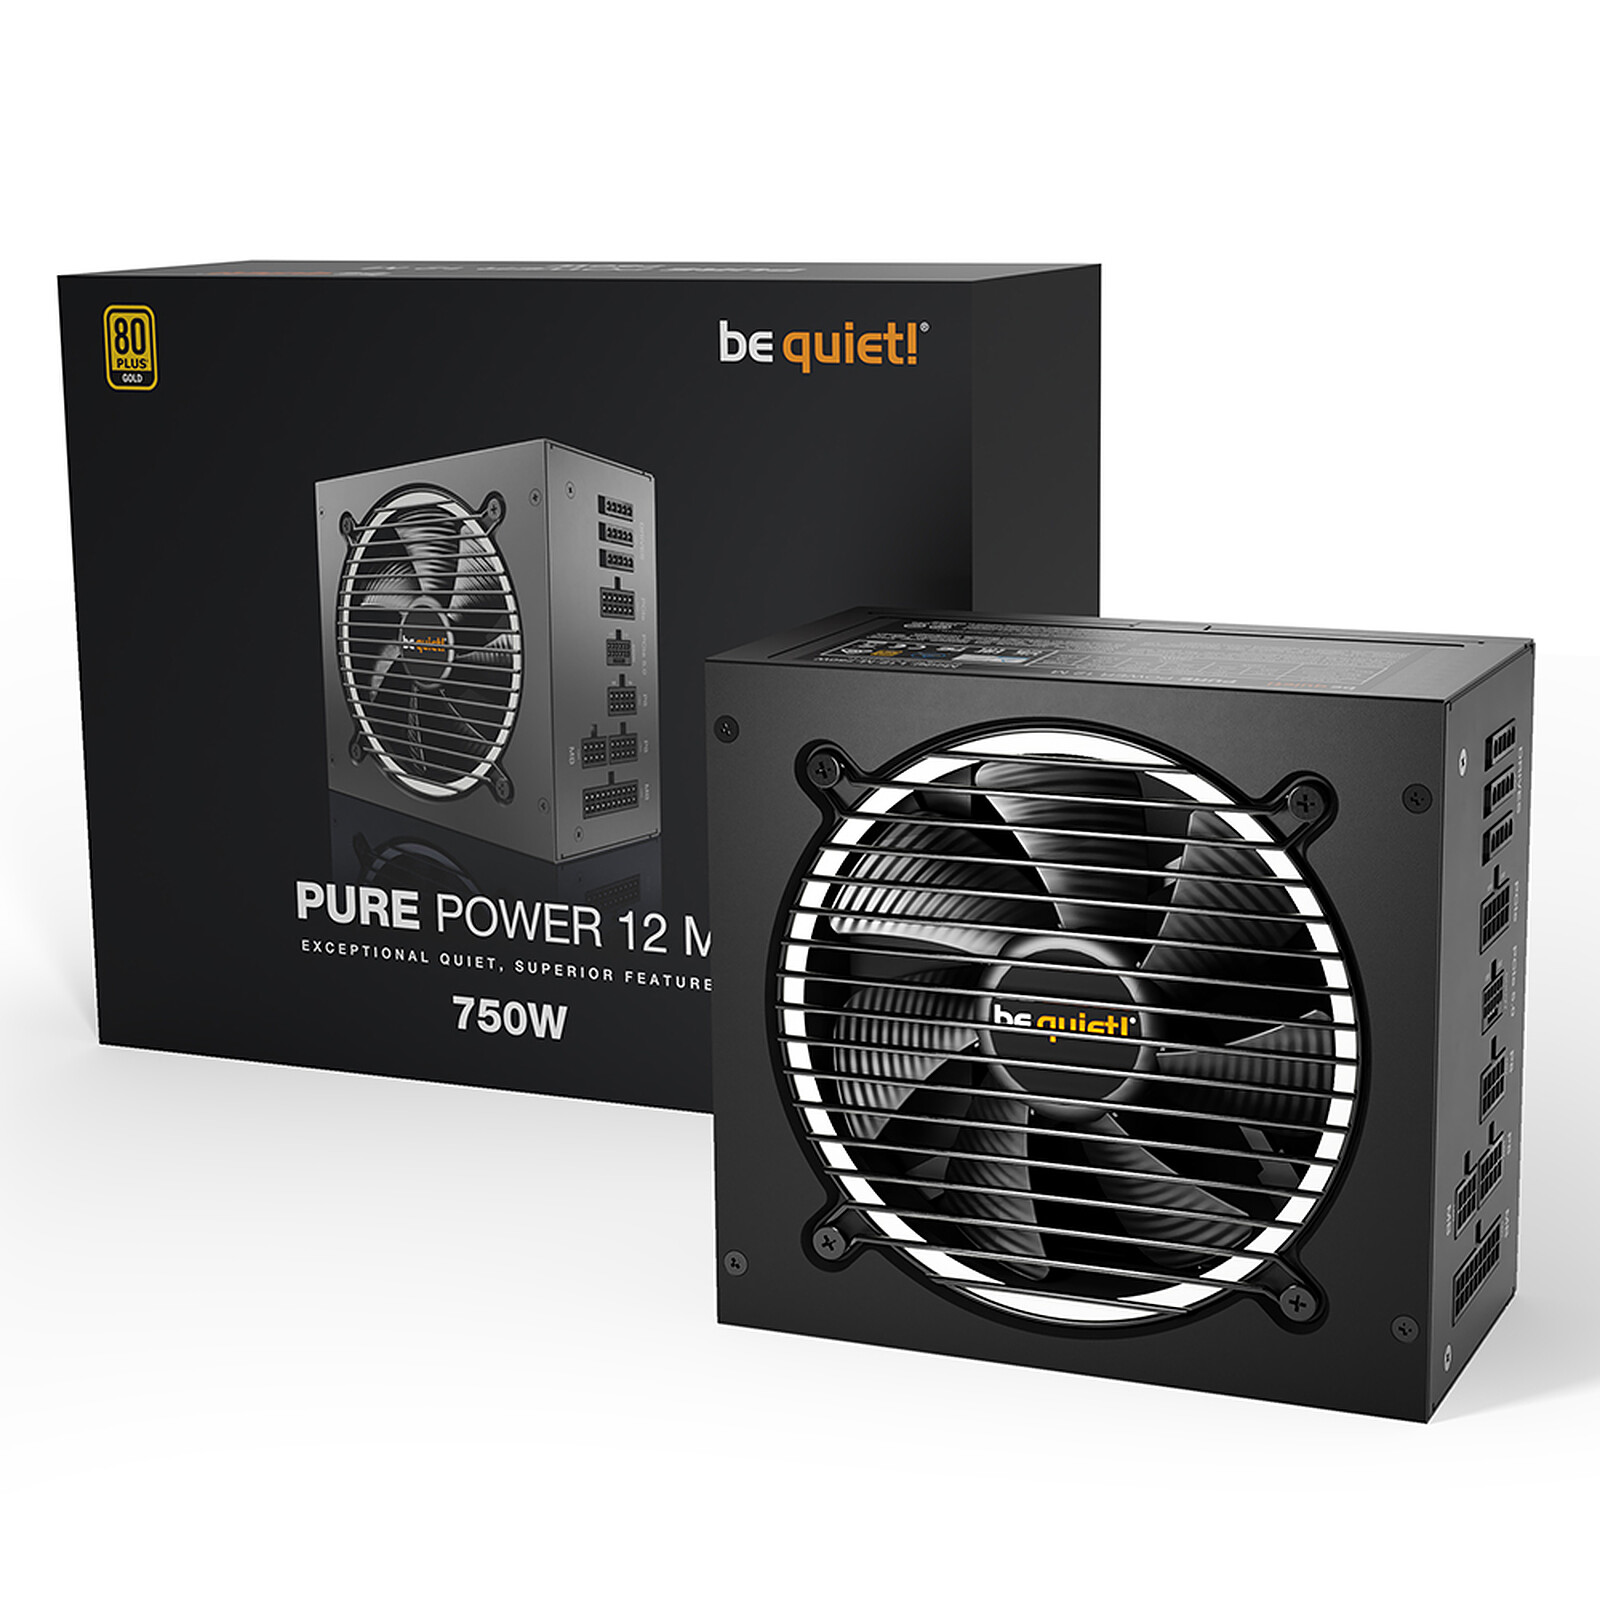 be quiet! Pure Power 12 M 750W 80PLUS Gold - PC power supply - LDLC 3-year warranty